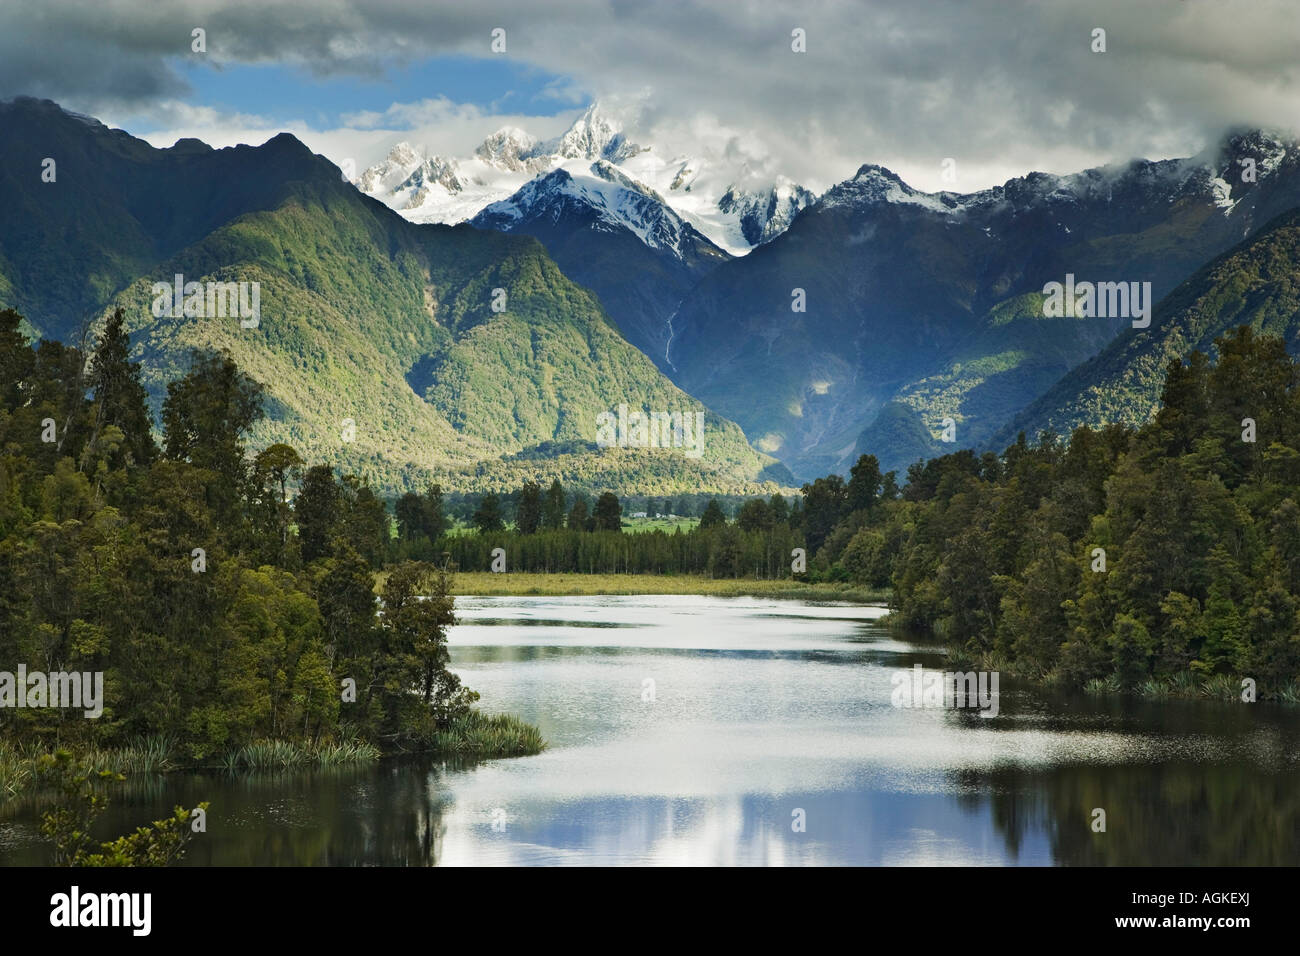 New Zealand, South Island. Cloud-shrouded Mt. Cook is reflected in Lake Matheson near the town of Fox Glacier. Stock Photo